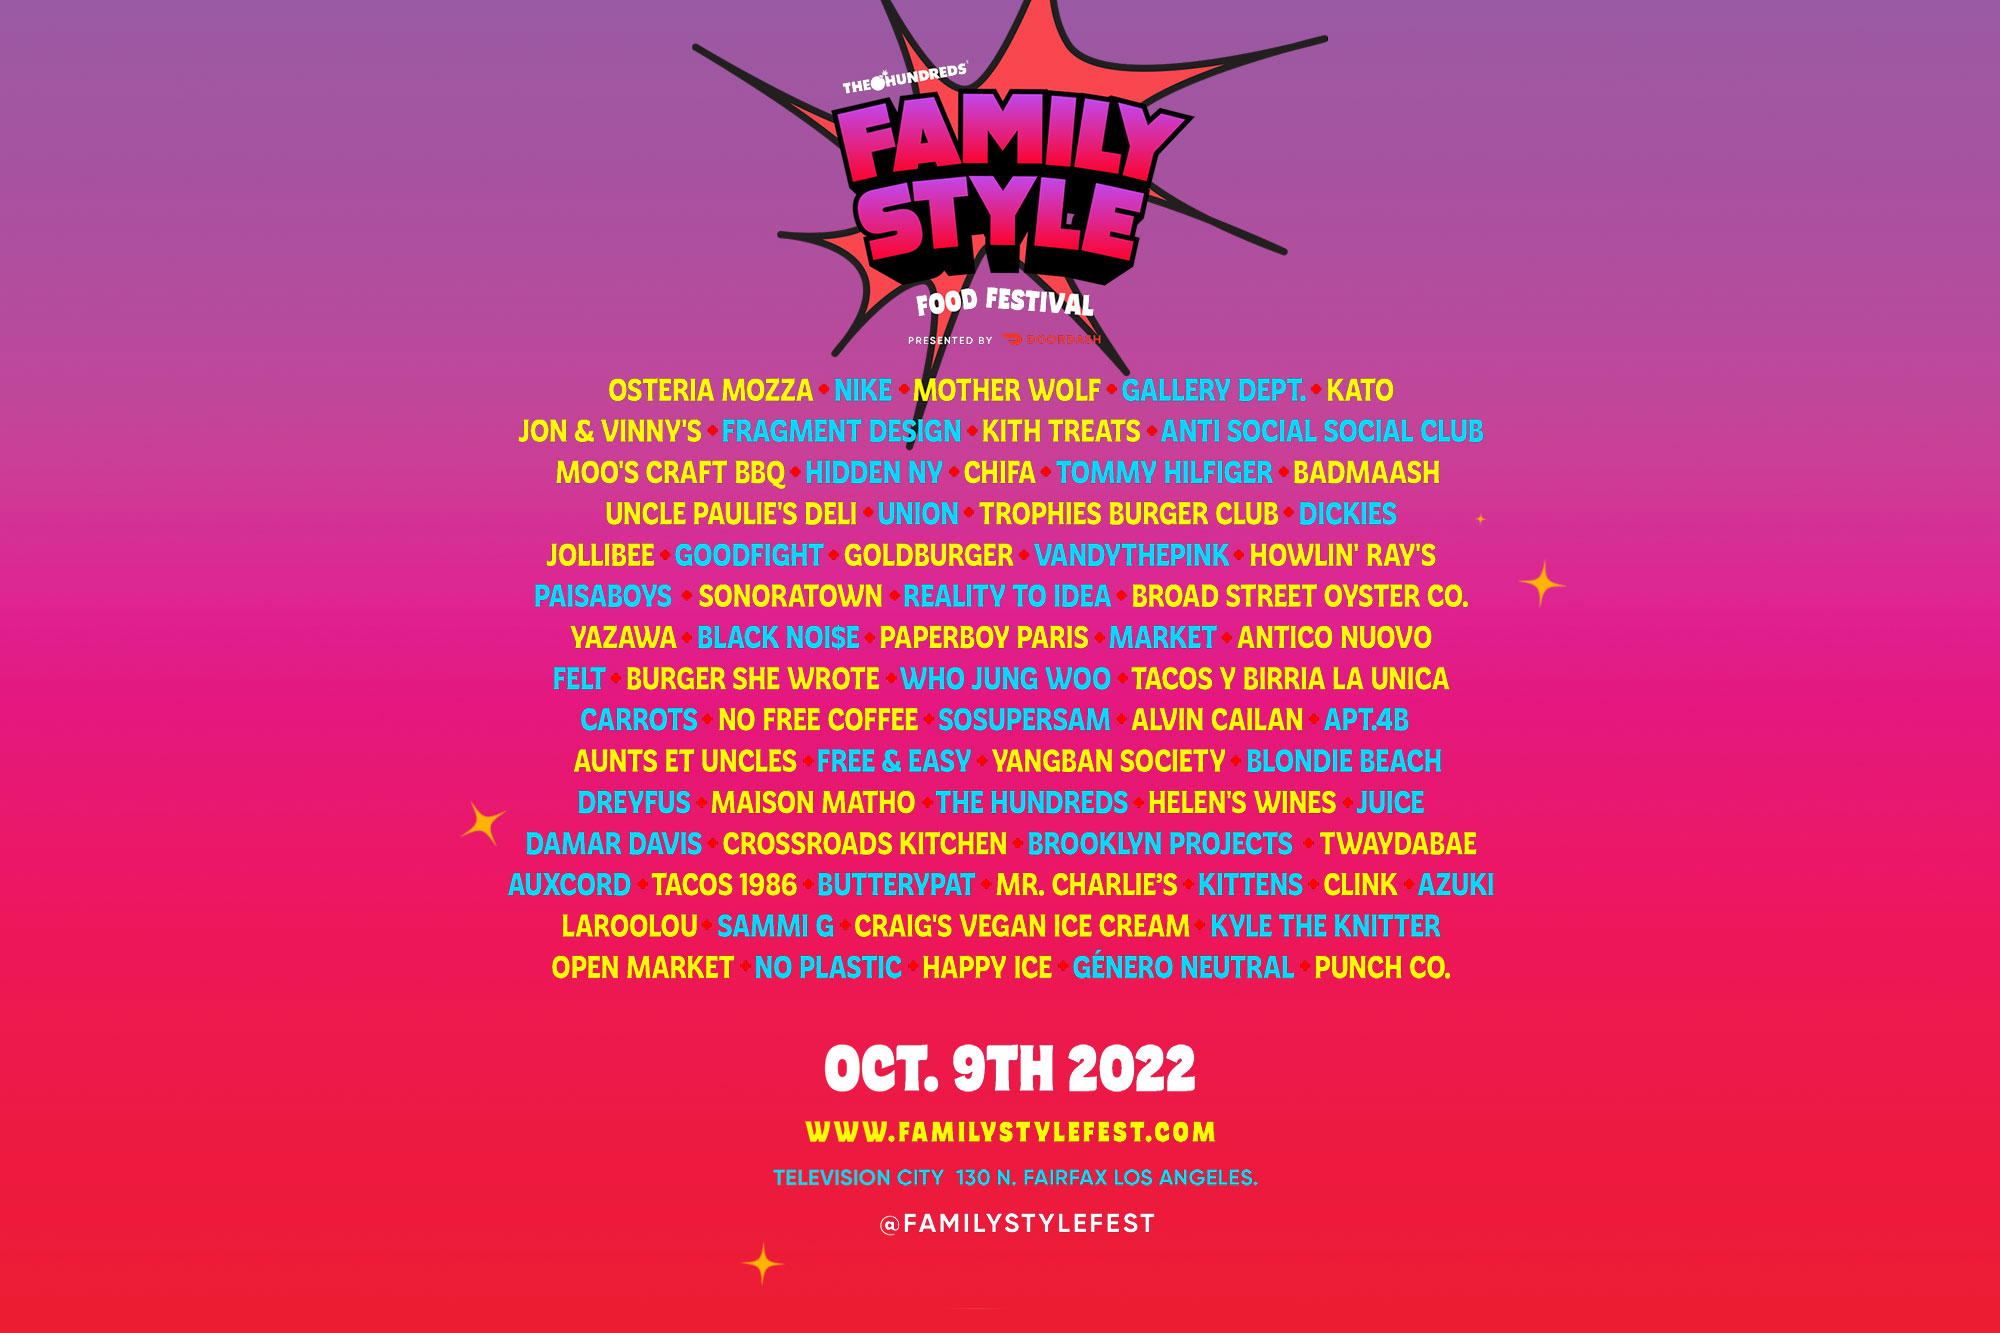 Family Style Food Festival Lineup